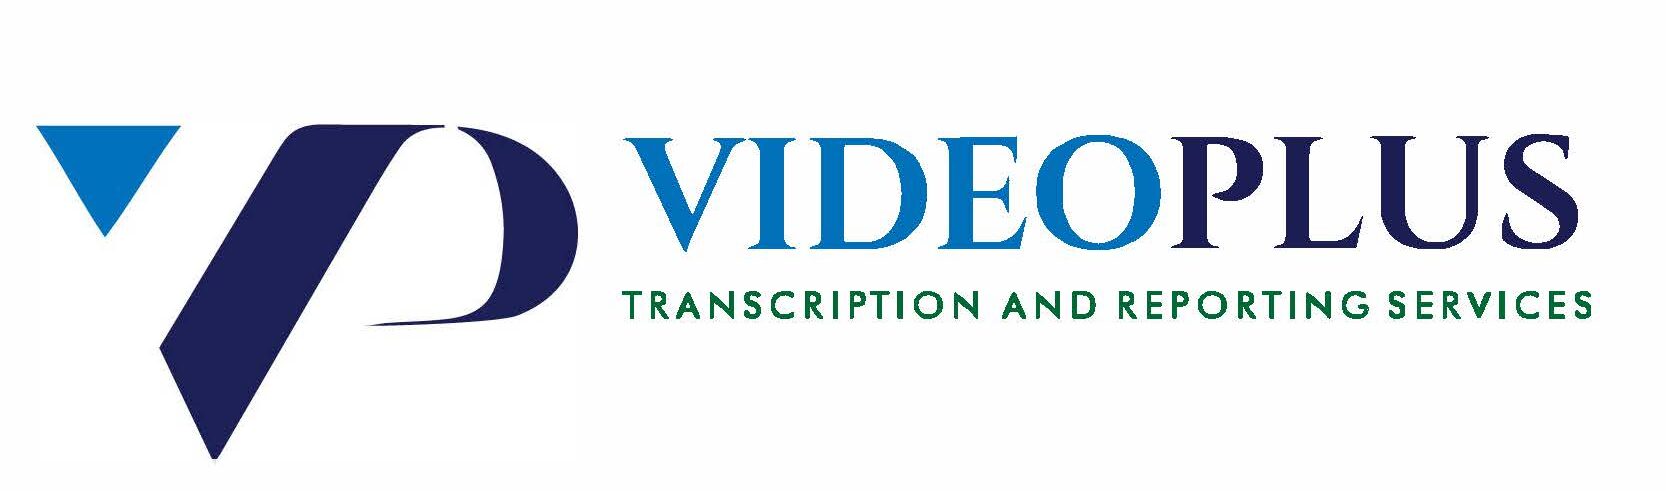 VideoPlus Transcription and Reporting Services